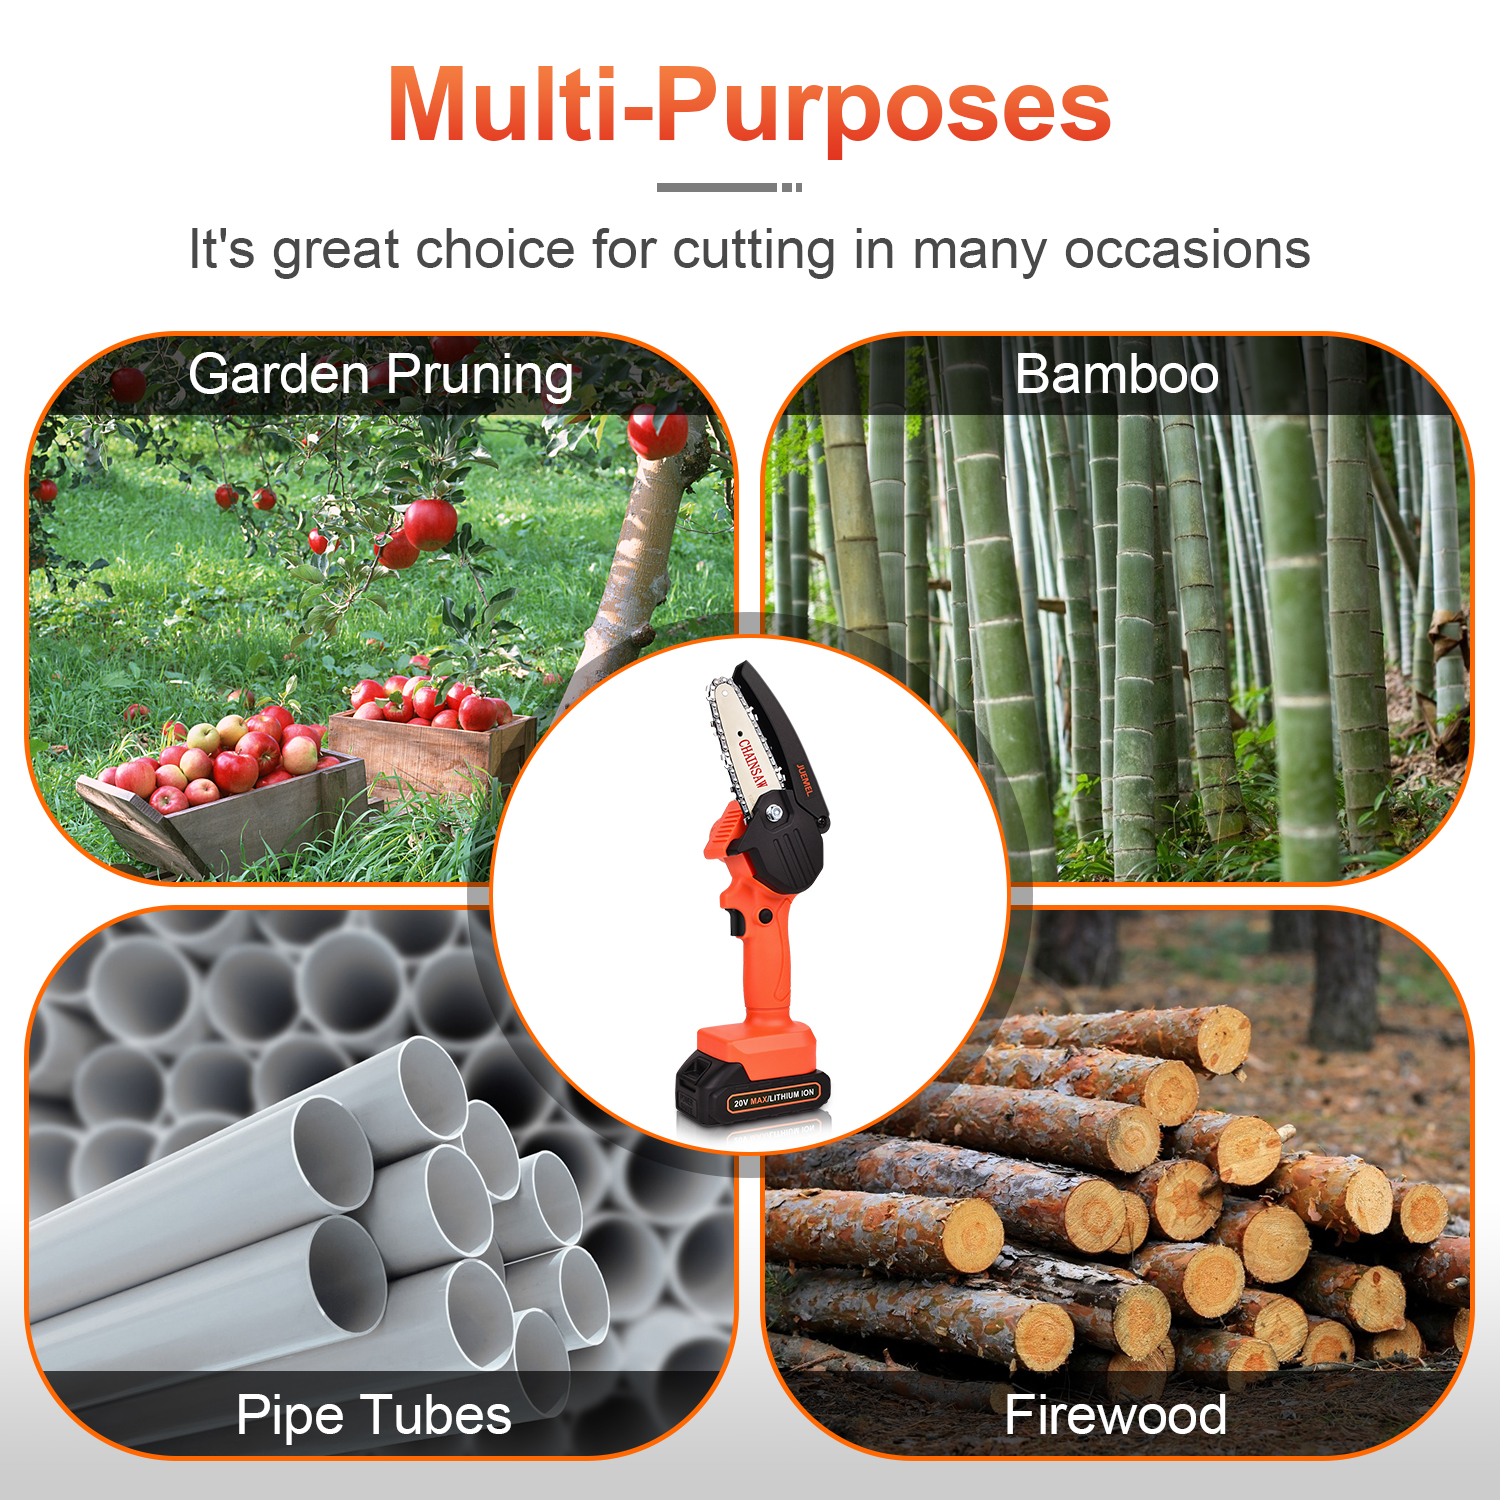 Cordless Chainsaw with 2 Battery, JUEMEL Portable Mini Chain Saw ( 20V Battery, Charger, 4-Inch Guide Plate) for Tree Pruning, Wood Cutting, Household and Garden